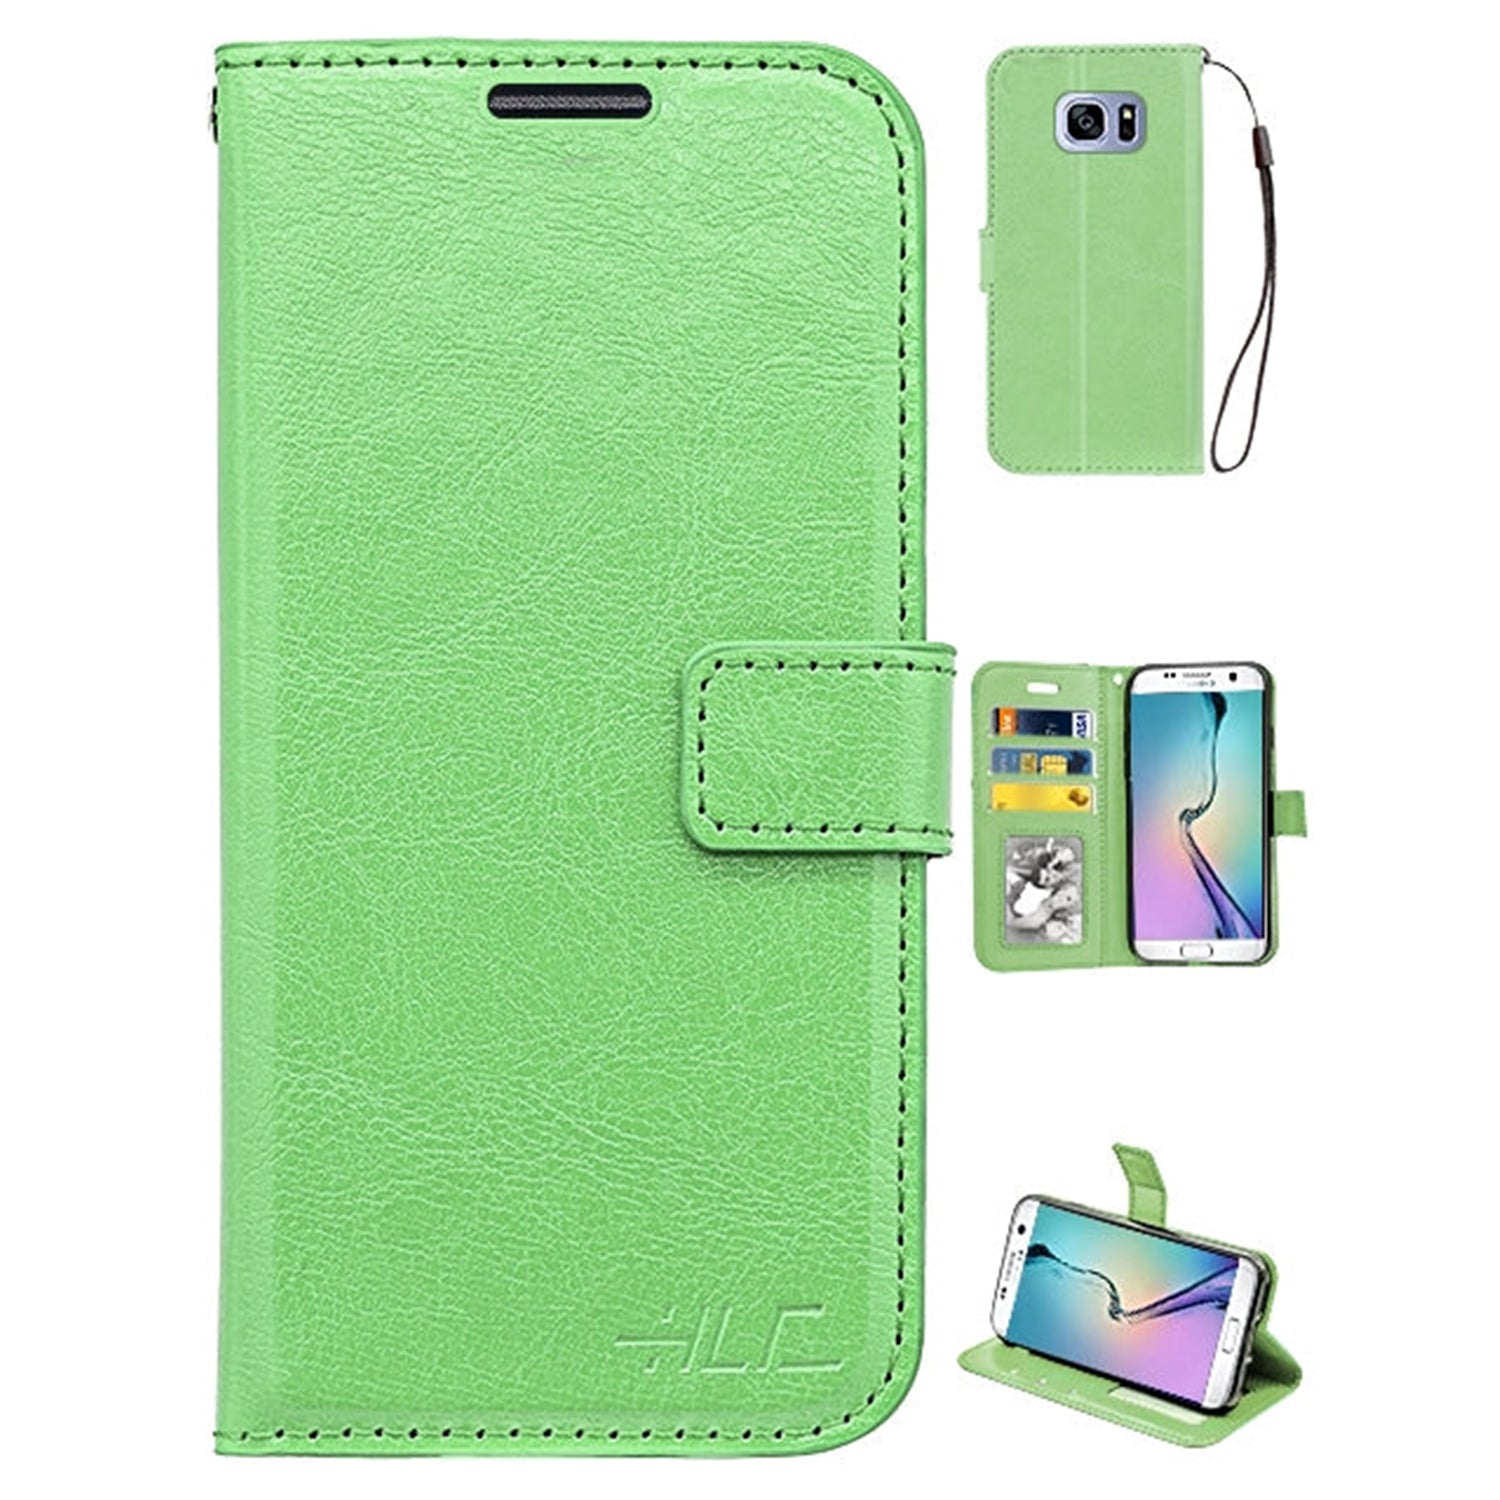 Real Plain Leather Wallet Case for Galaxy S7 Edge